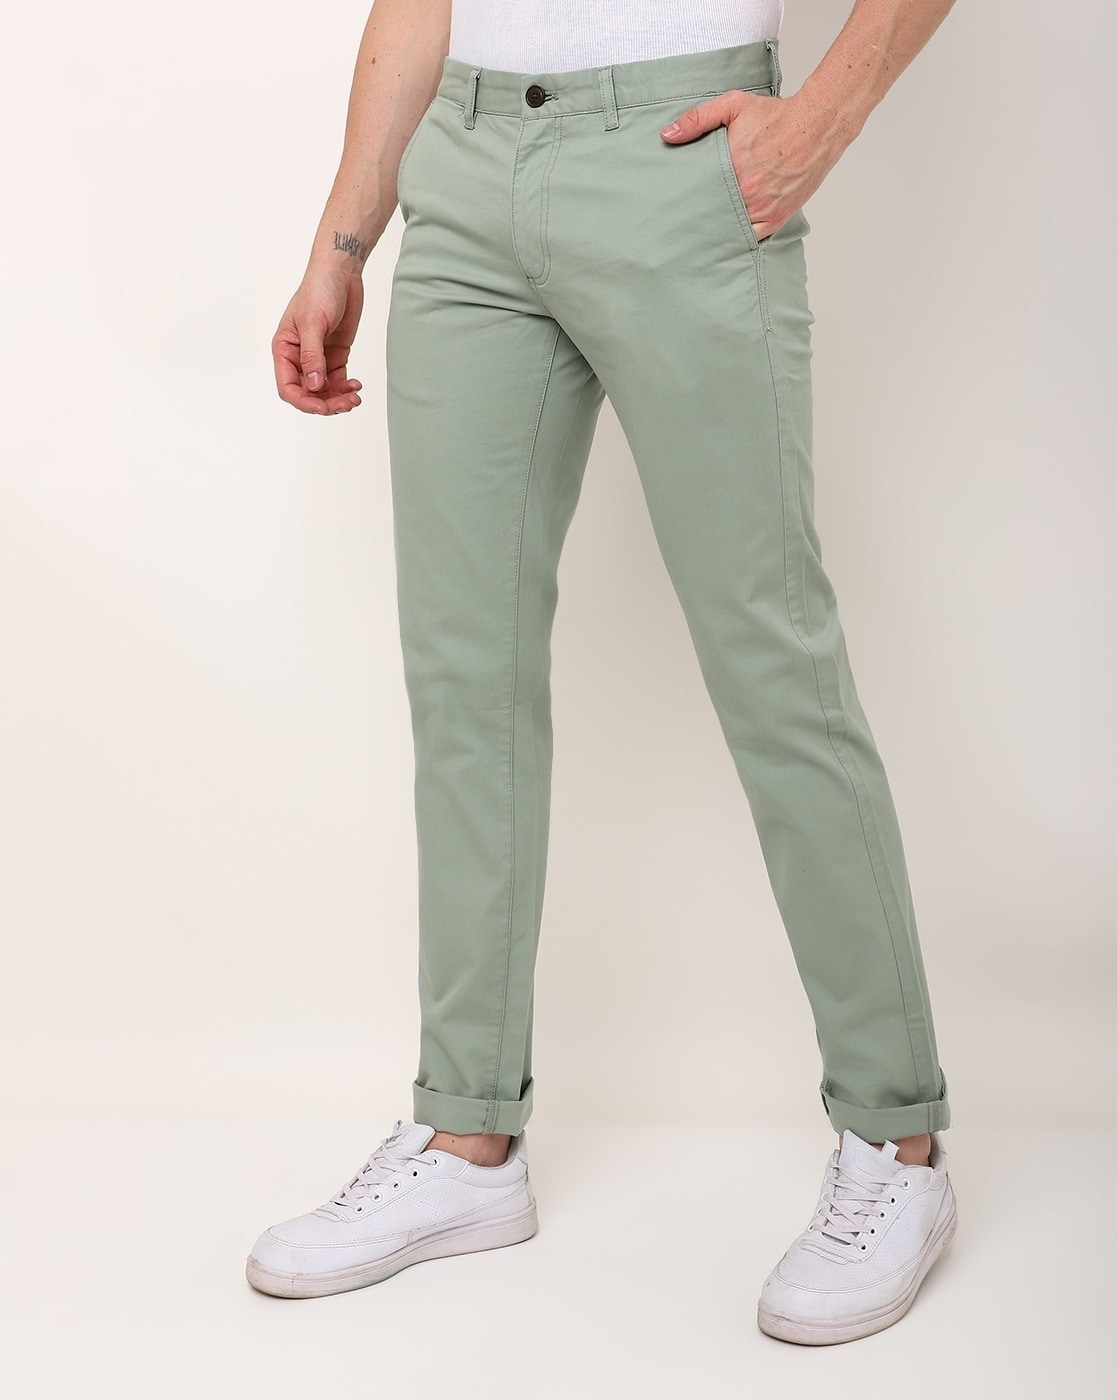 Classic Polo Mens Solid Moderate Fit Green Trousers - Ares Lt.Pista -  Classic Polo